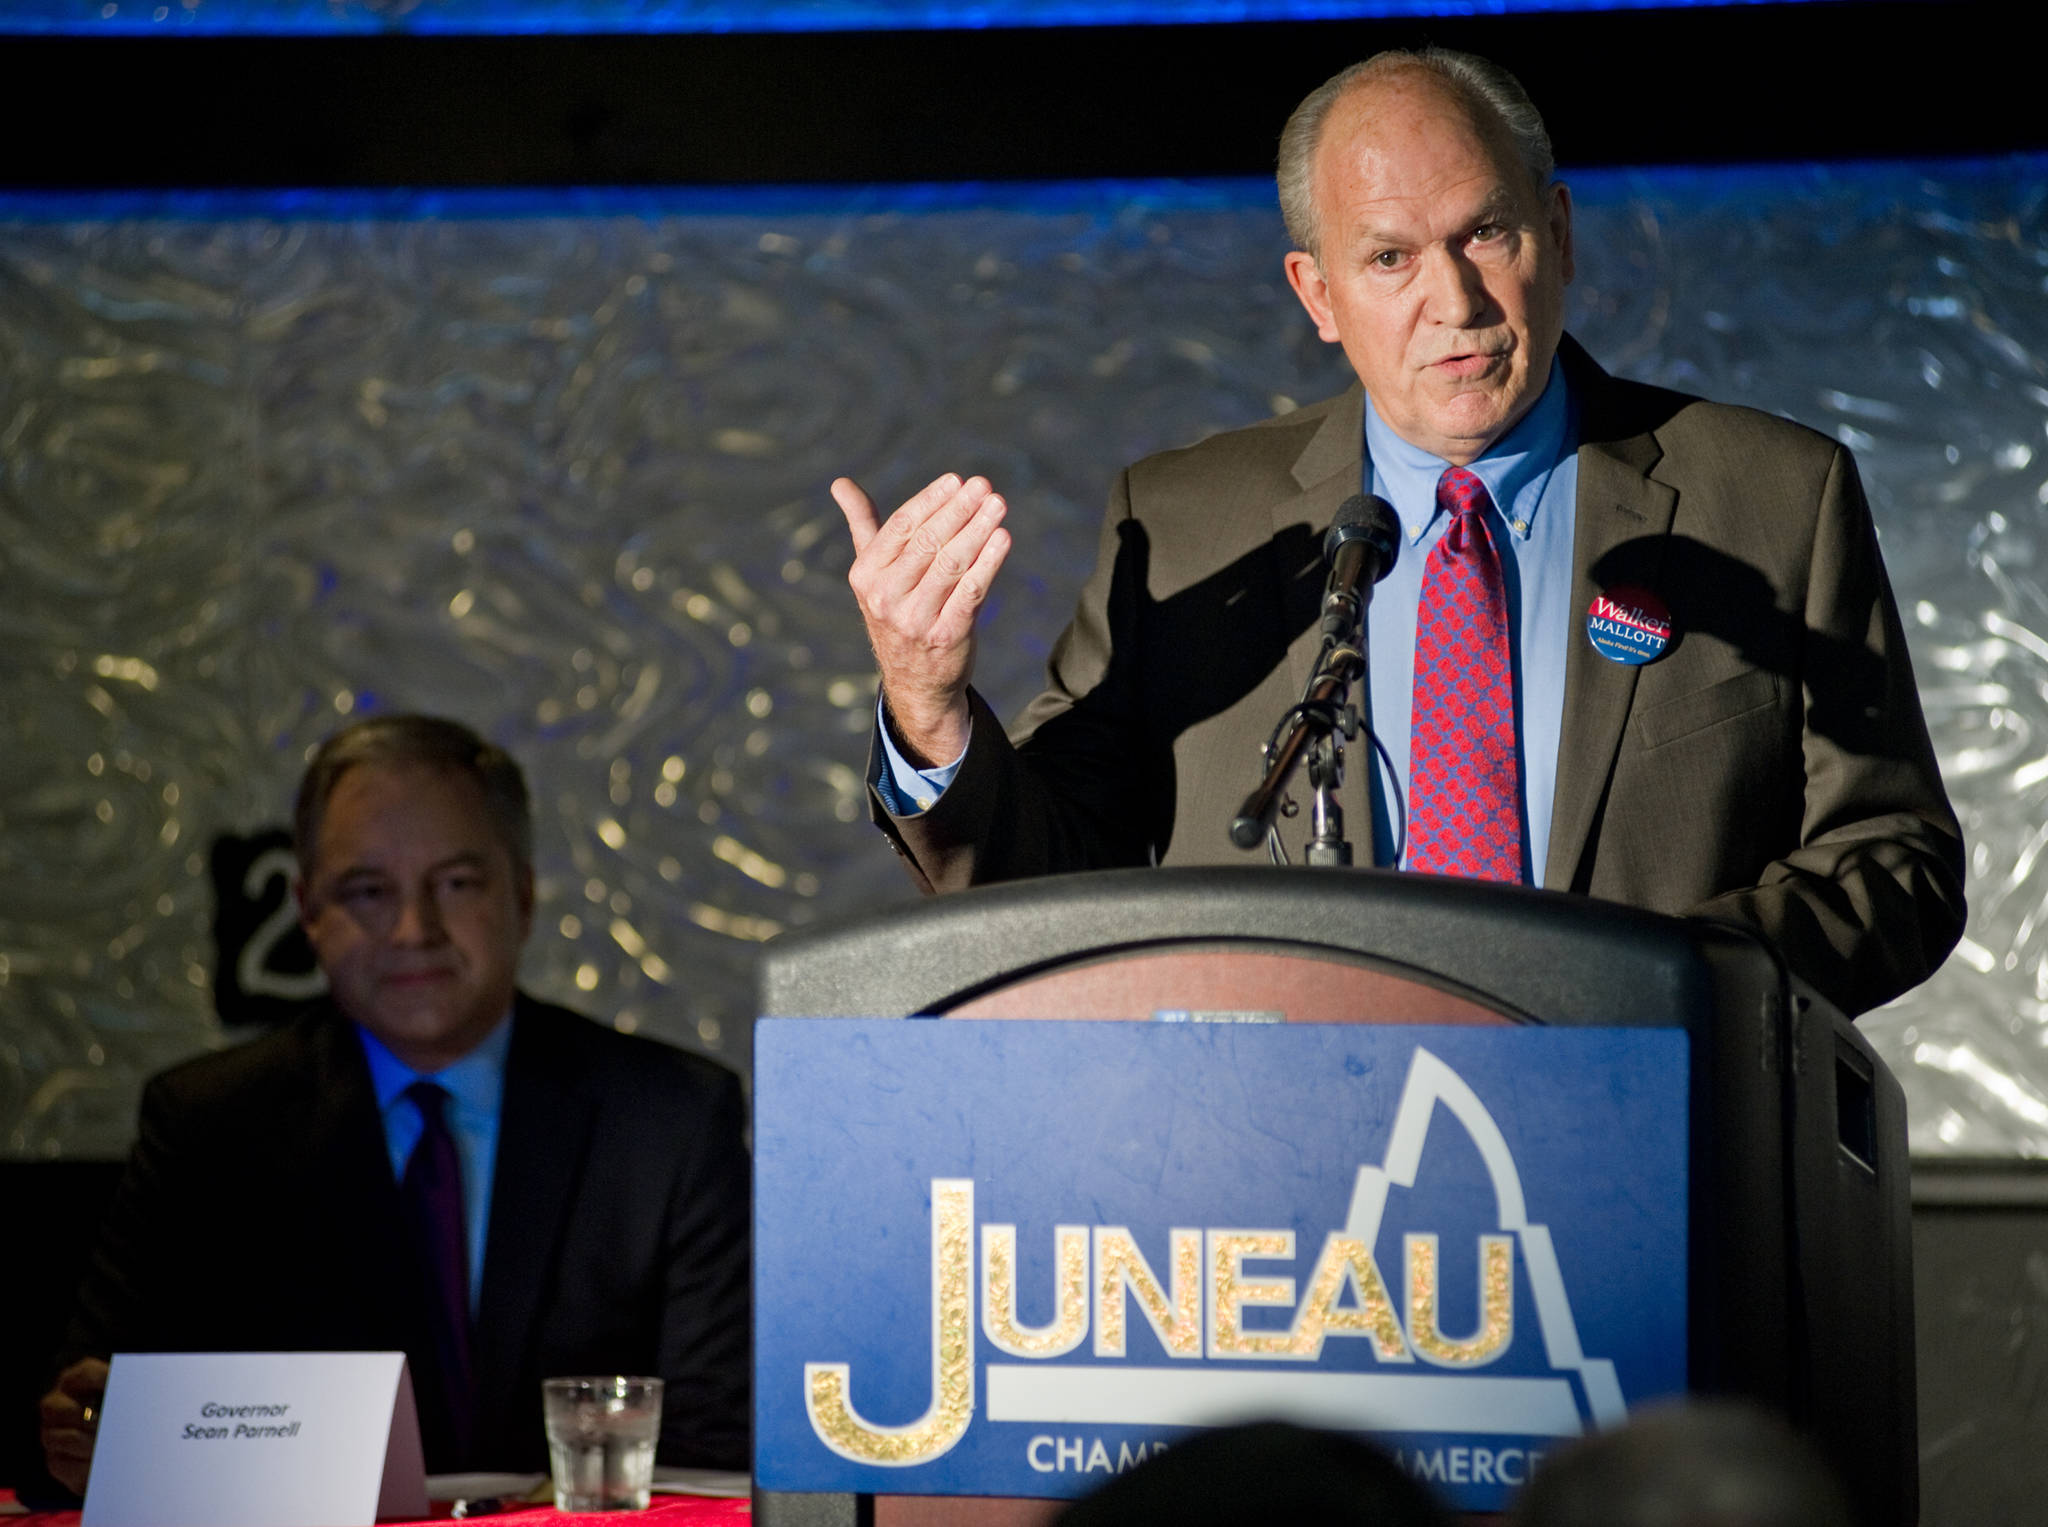 In this Sept. 29, 2014 photo, candidate for governor Bill Walker speaks as Gov. Sean Parnell listens during their debate in front of the Juneau Chamber of Commerce at Suite 907. (Michael Penn | Juneau Empire File)